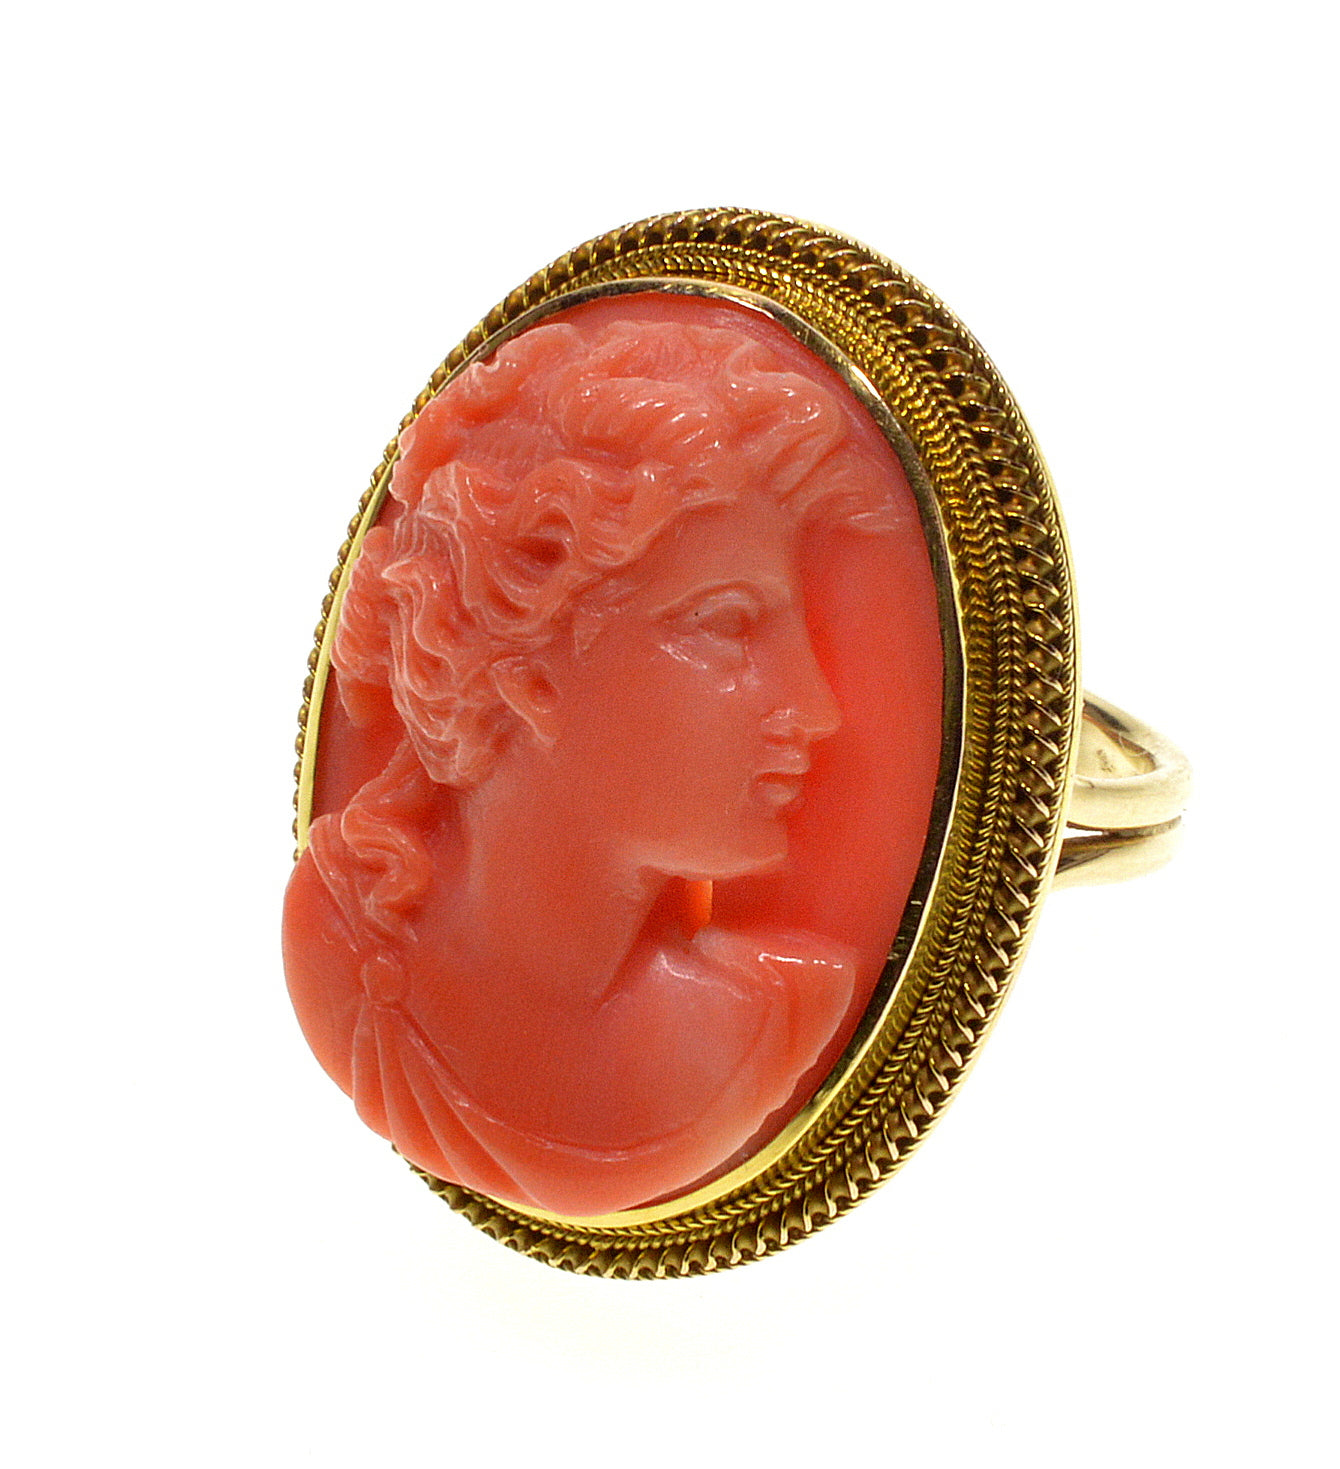 Antique Victorian 14K Gold Salmon Coral Cameo Ring Size 5 3/4 C.1890